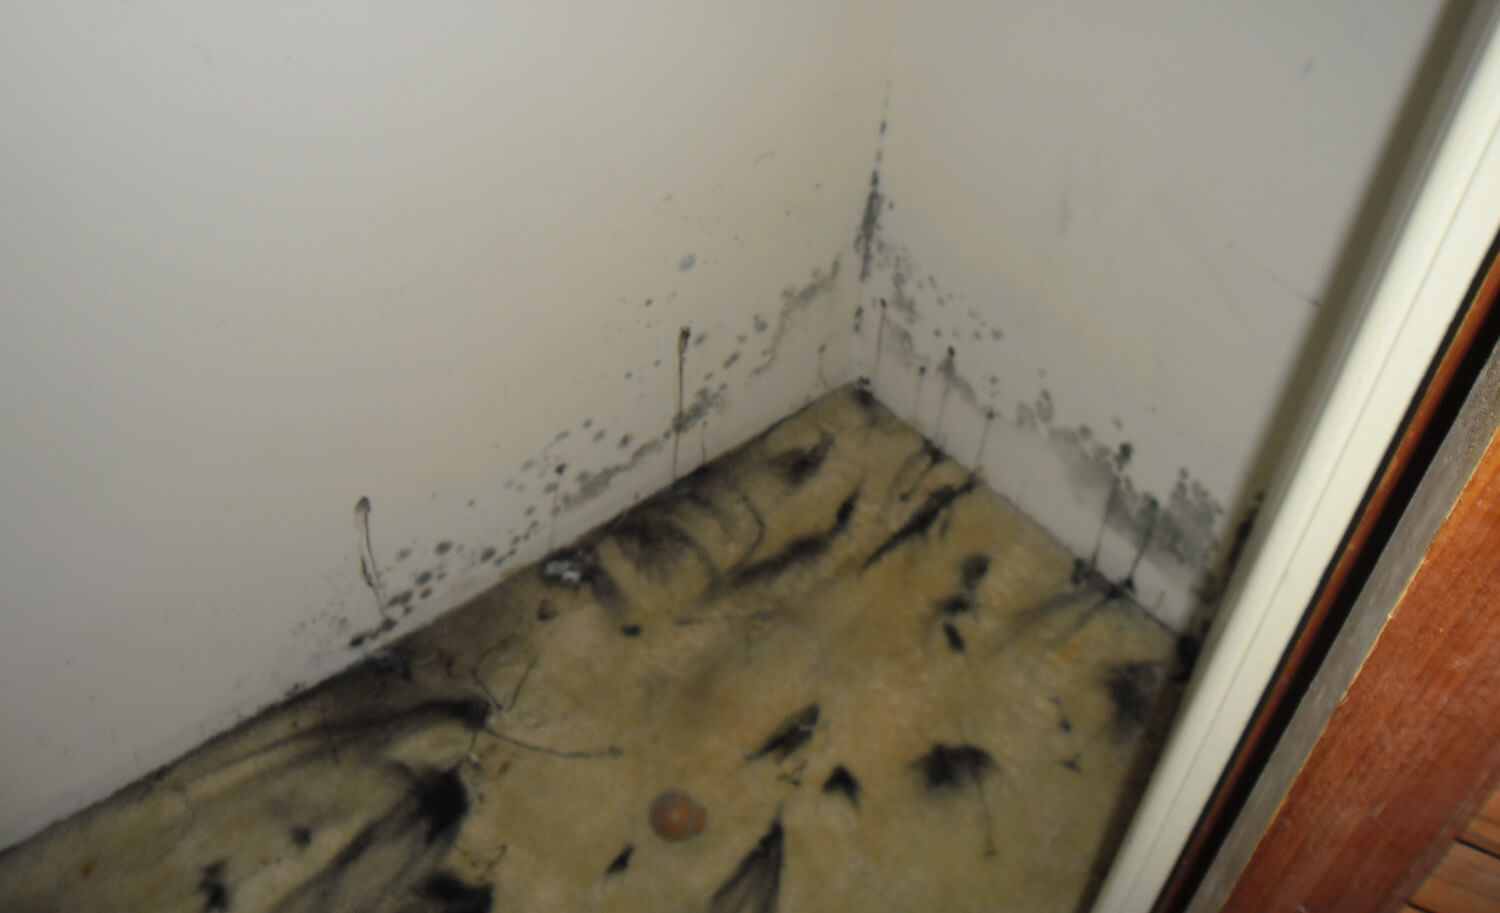 severe mould outbreak on carpet within a residential home